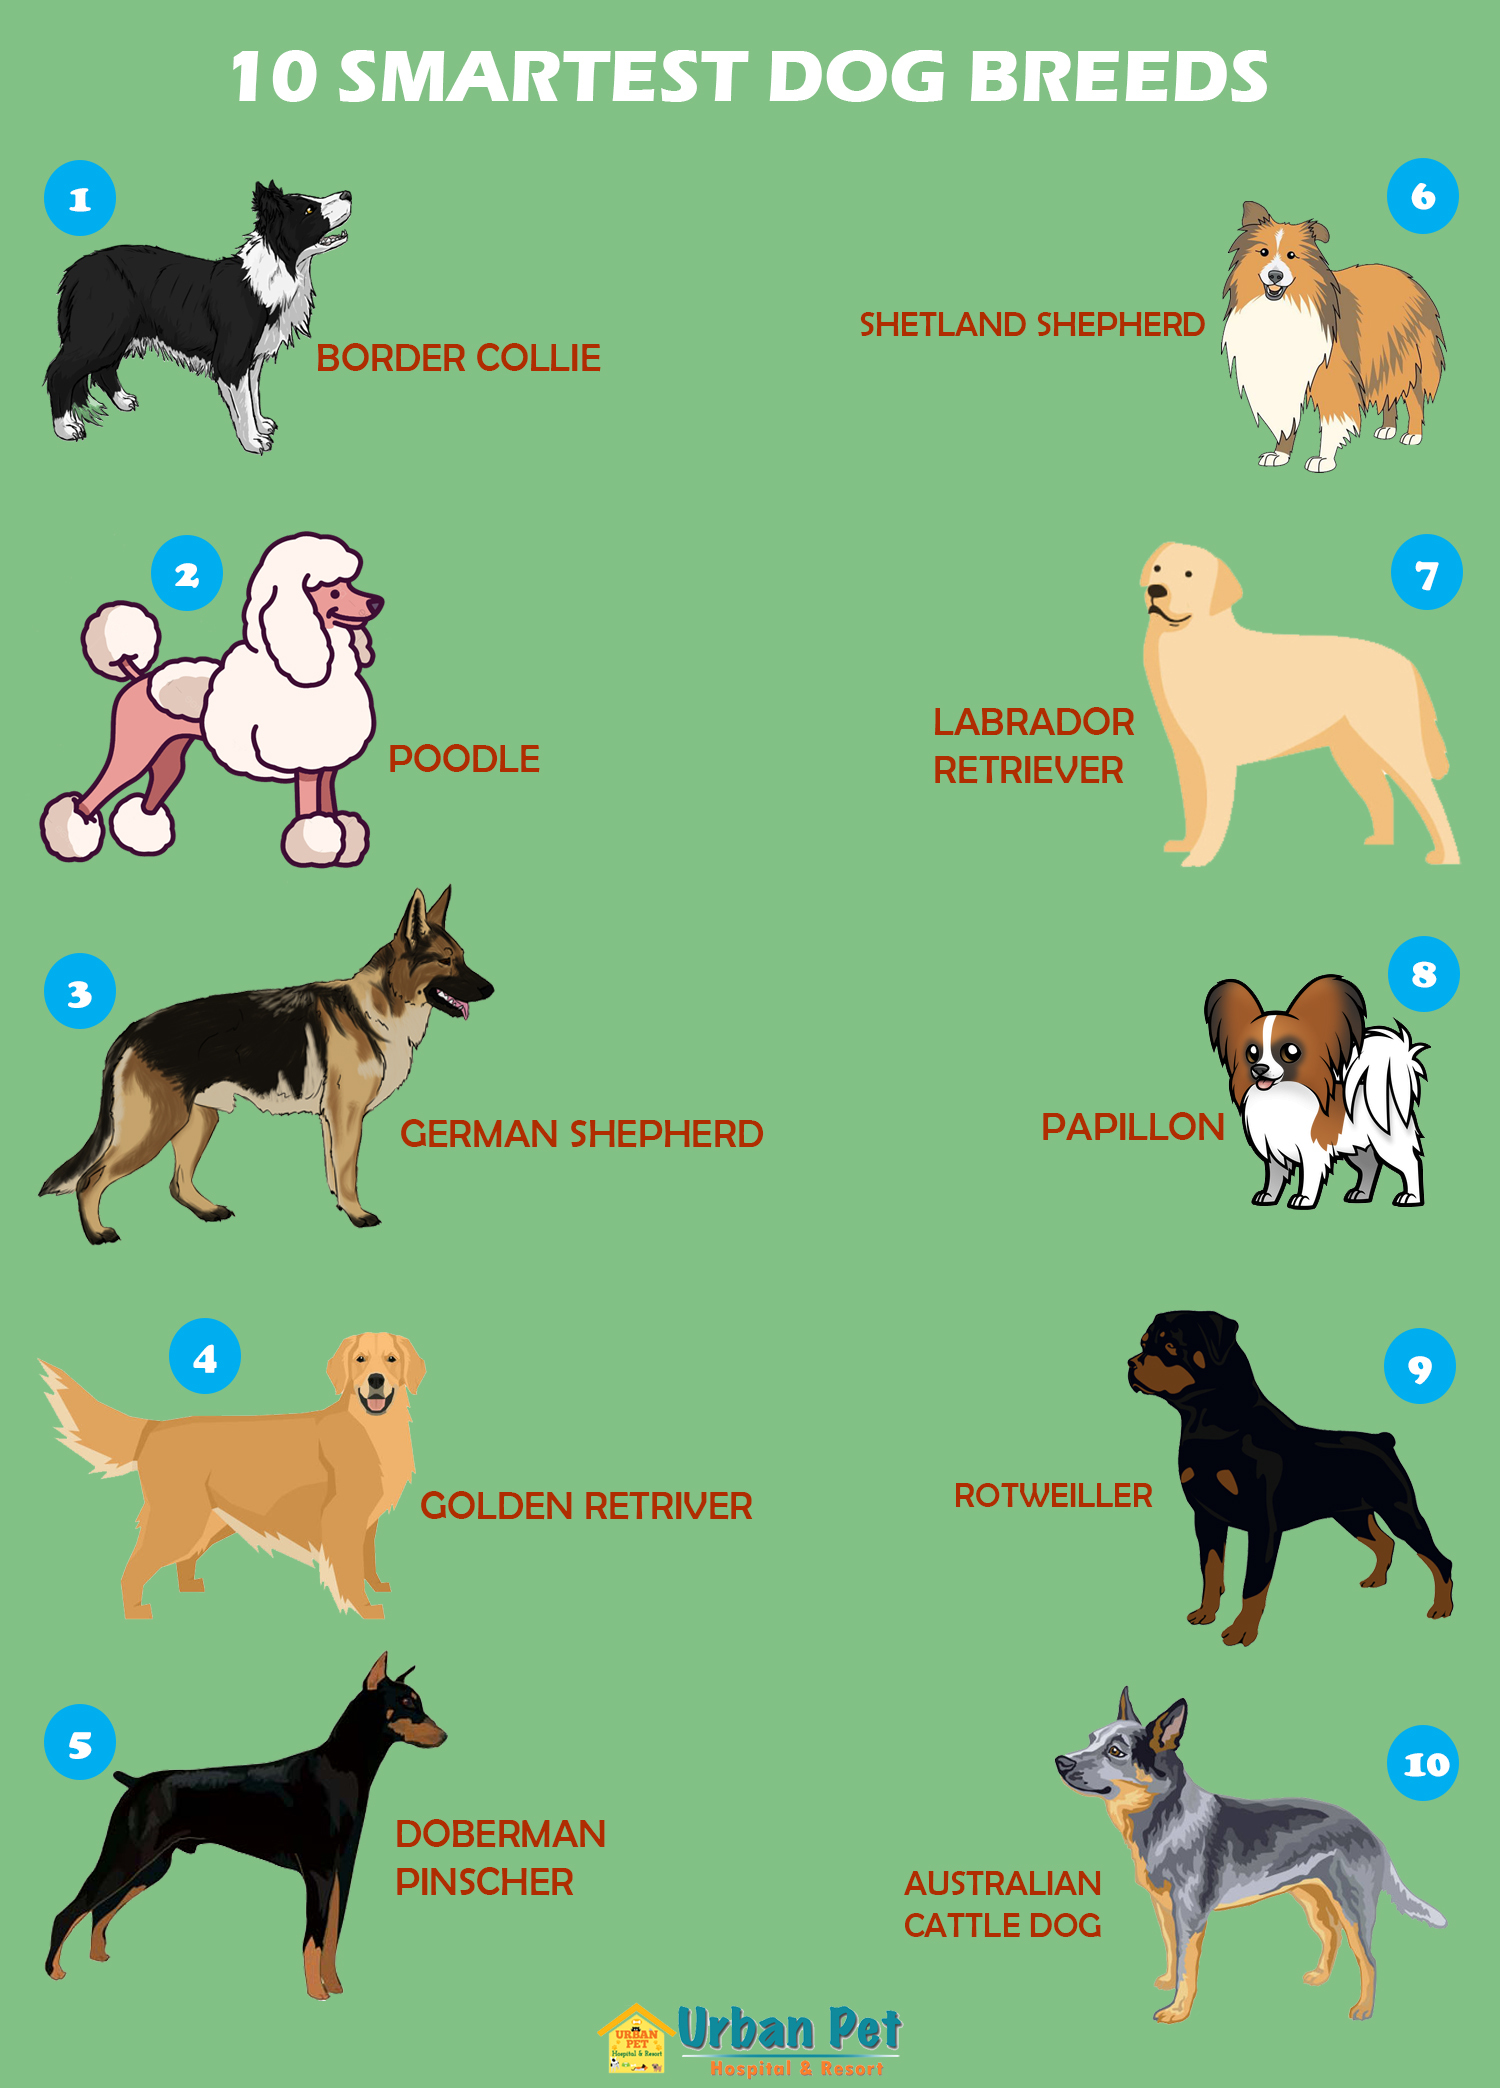 What Are The 5 Smartest Dog Breeds